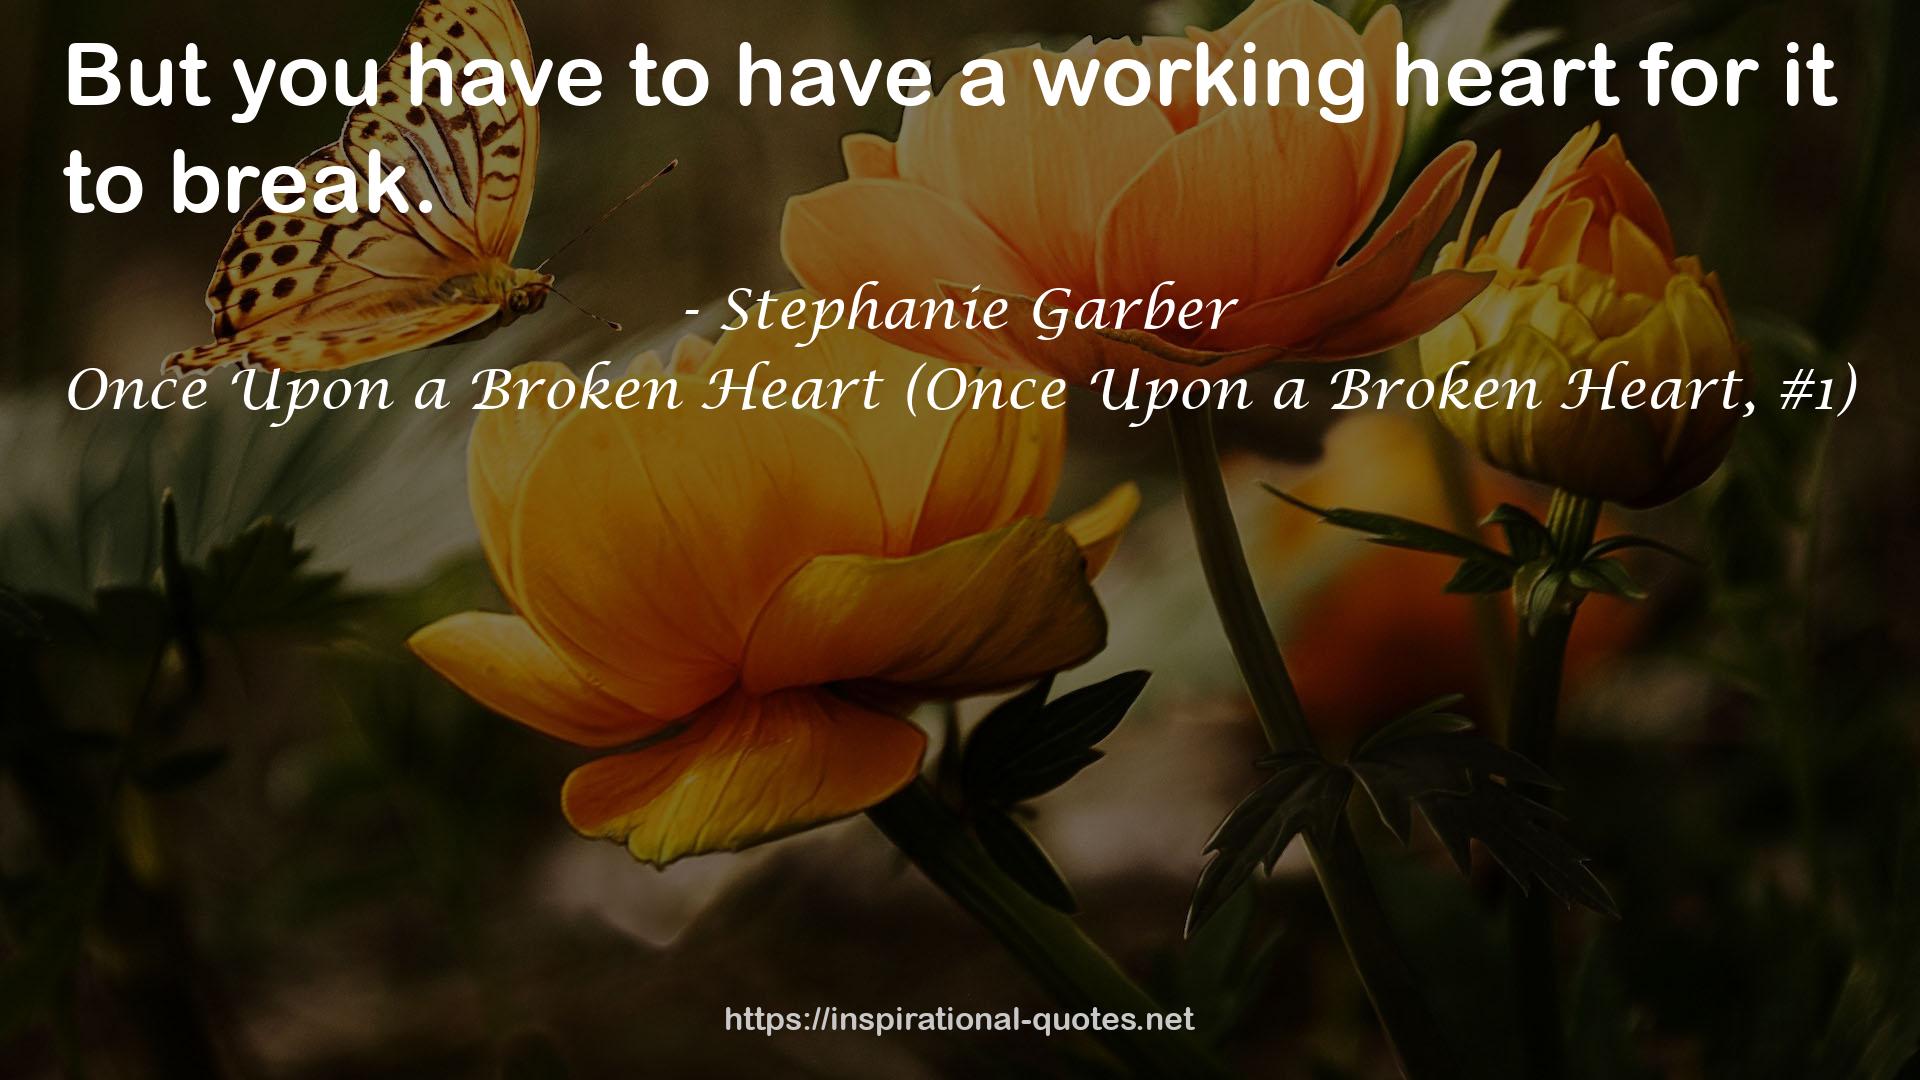 Once Upon a Broken Heart (Once Upon a Broken Heart, #1) QUOTES